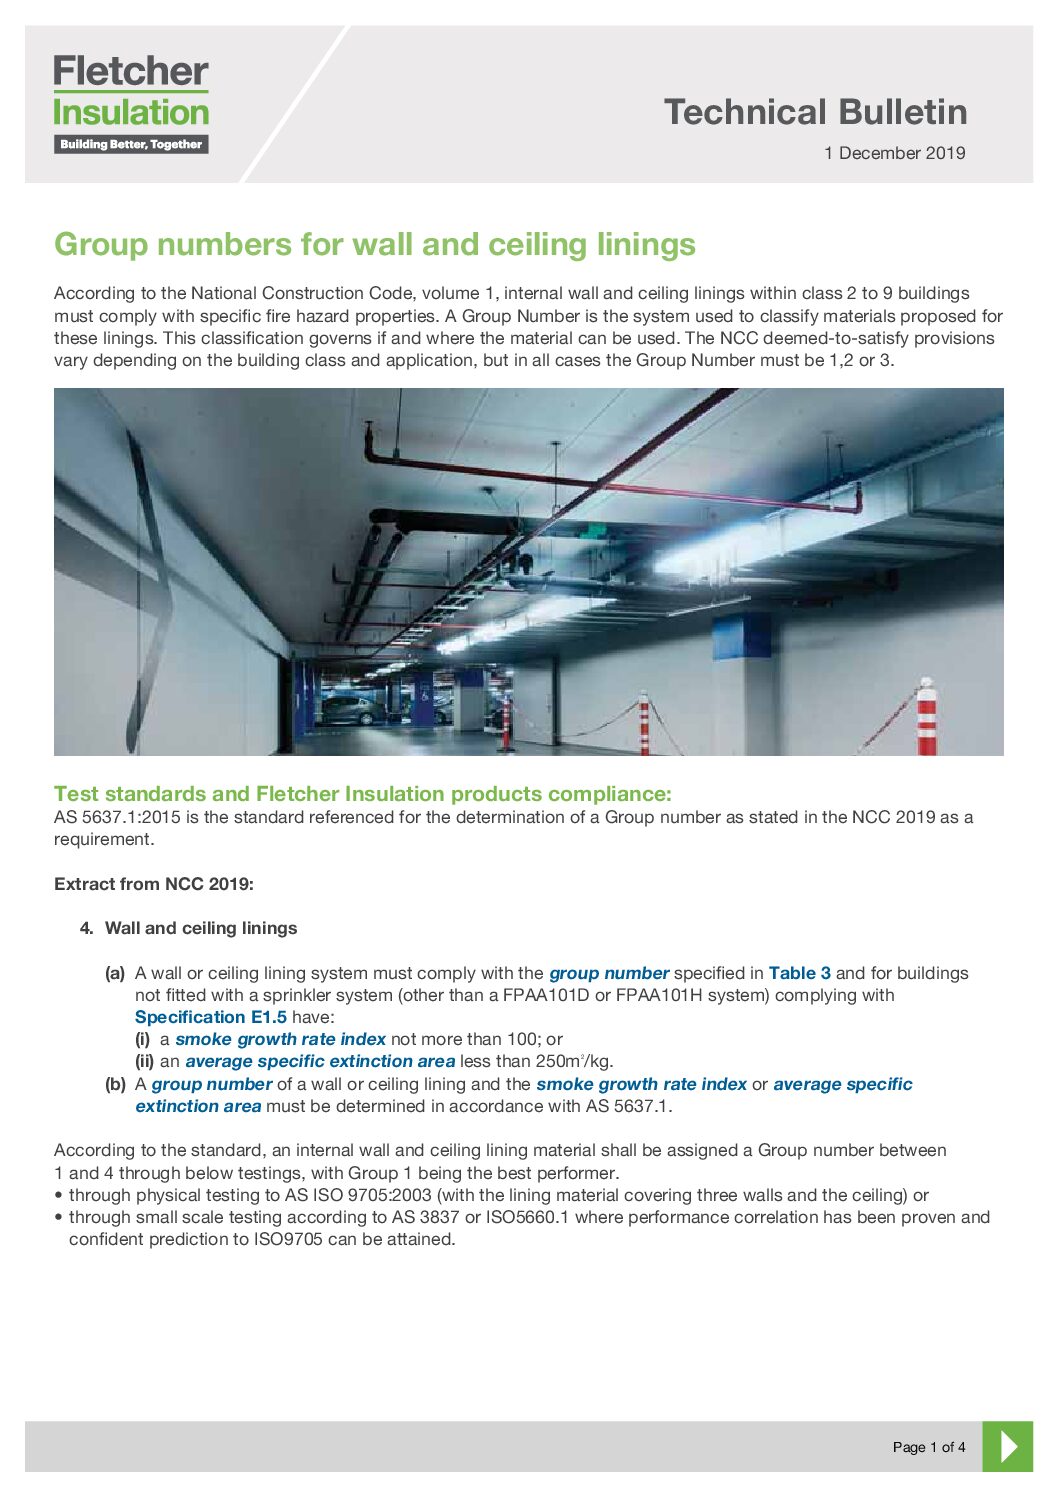 Technical Bulletin – Group numbers for wall and ceiling linings